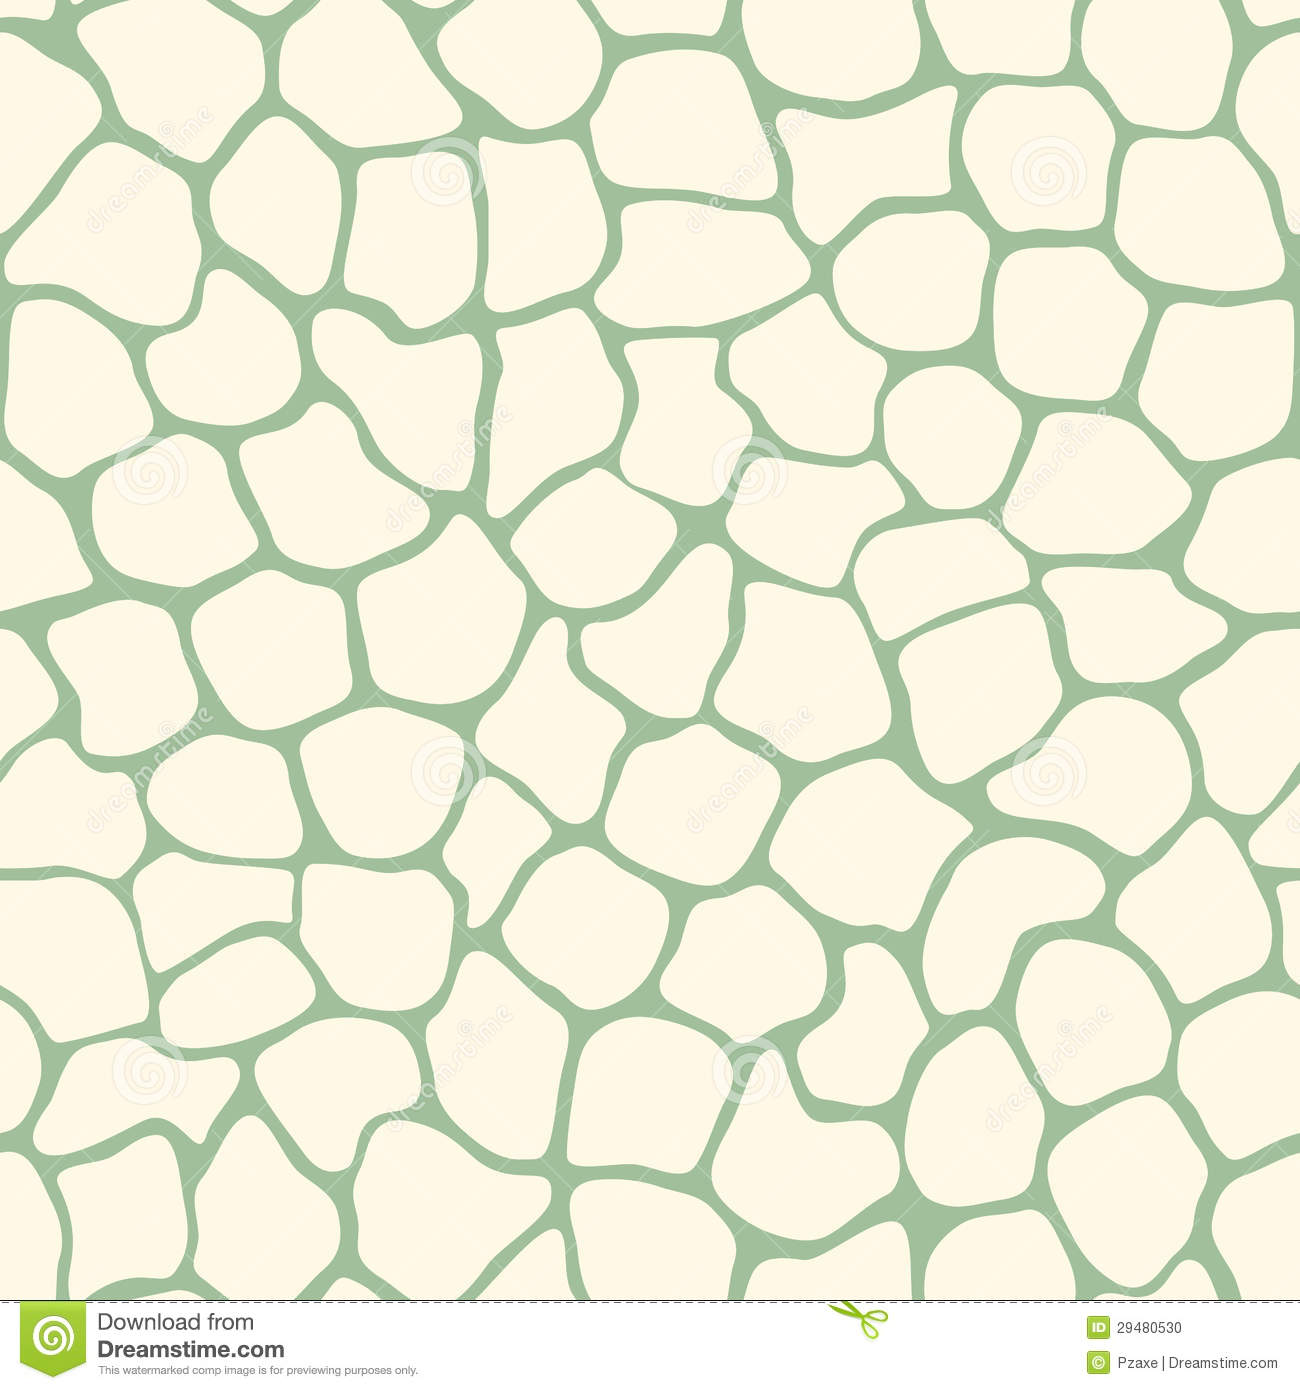 11 Photos of Simple Vector Patterns